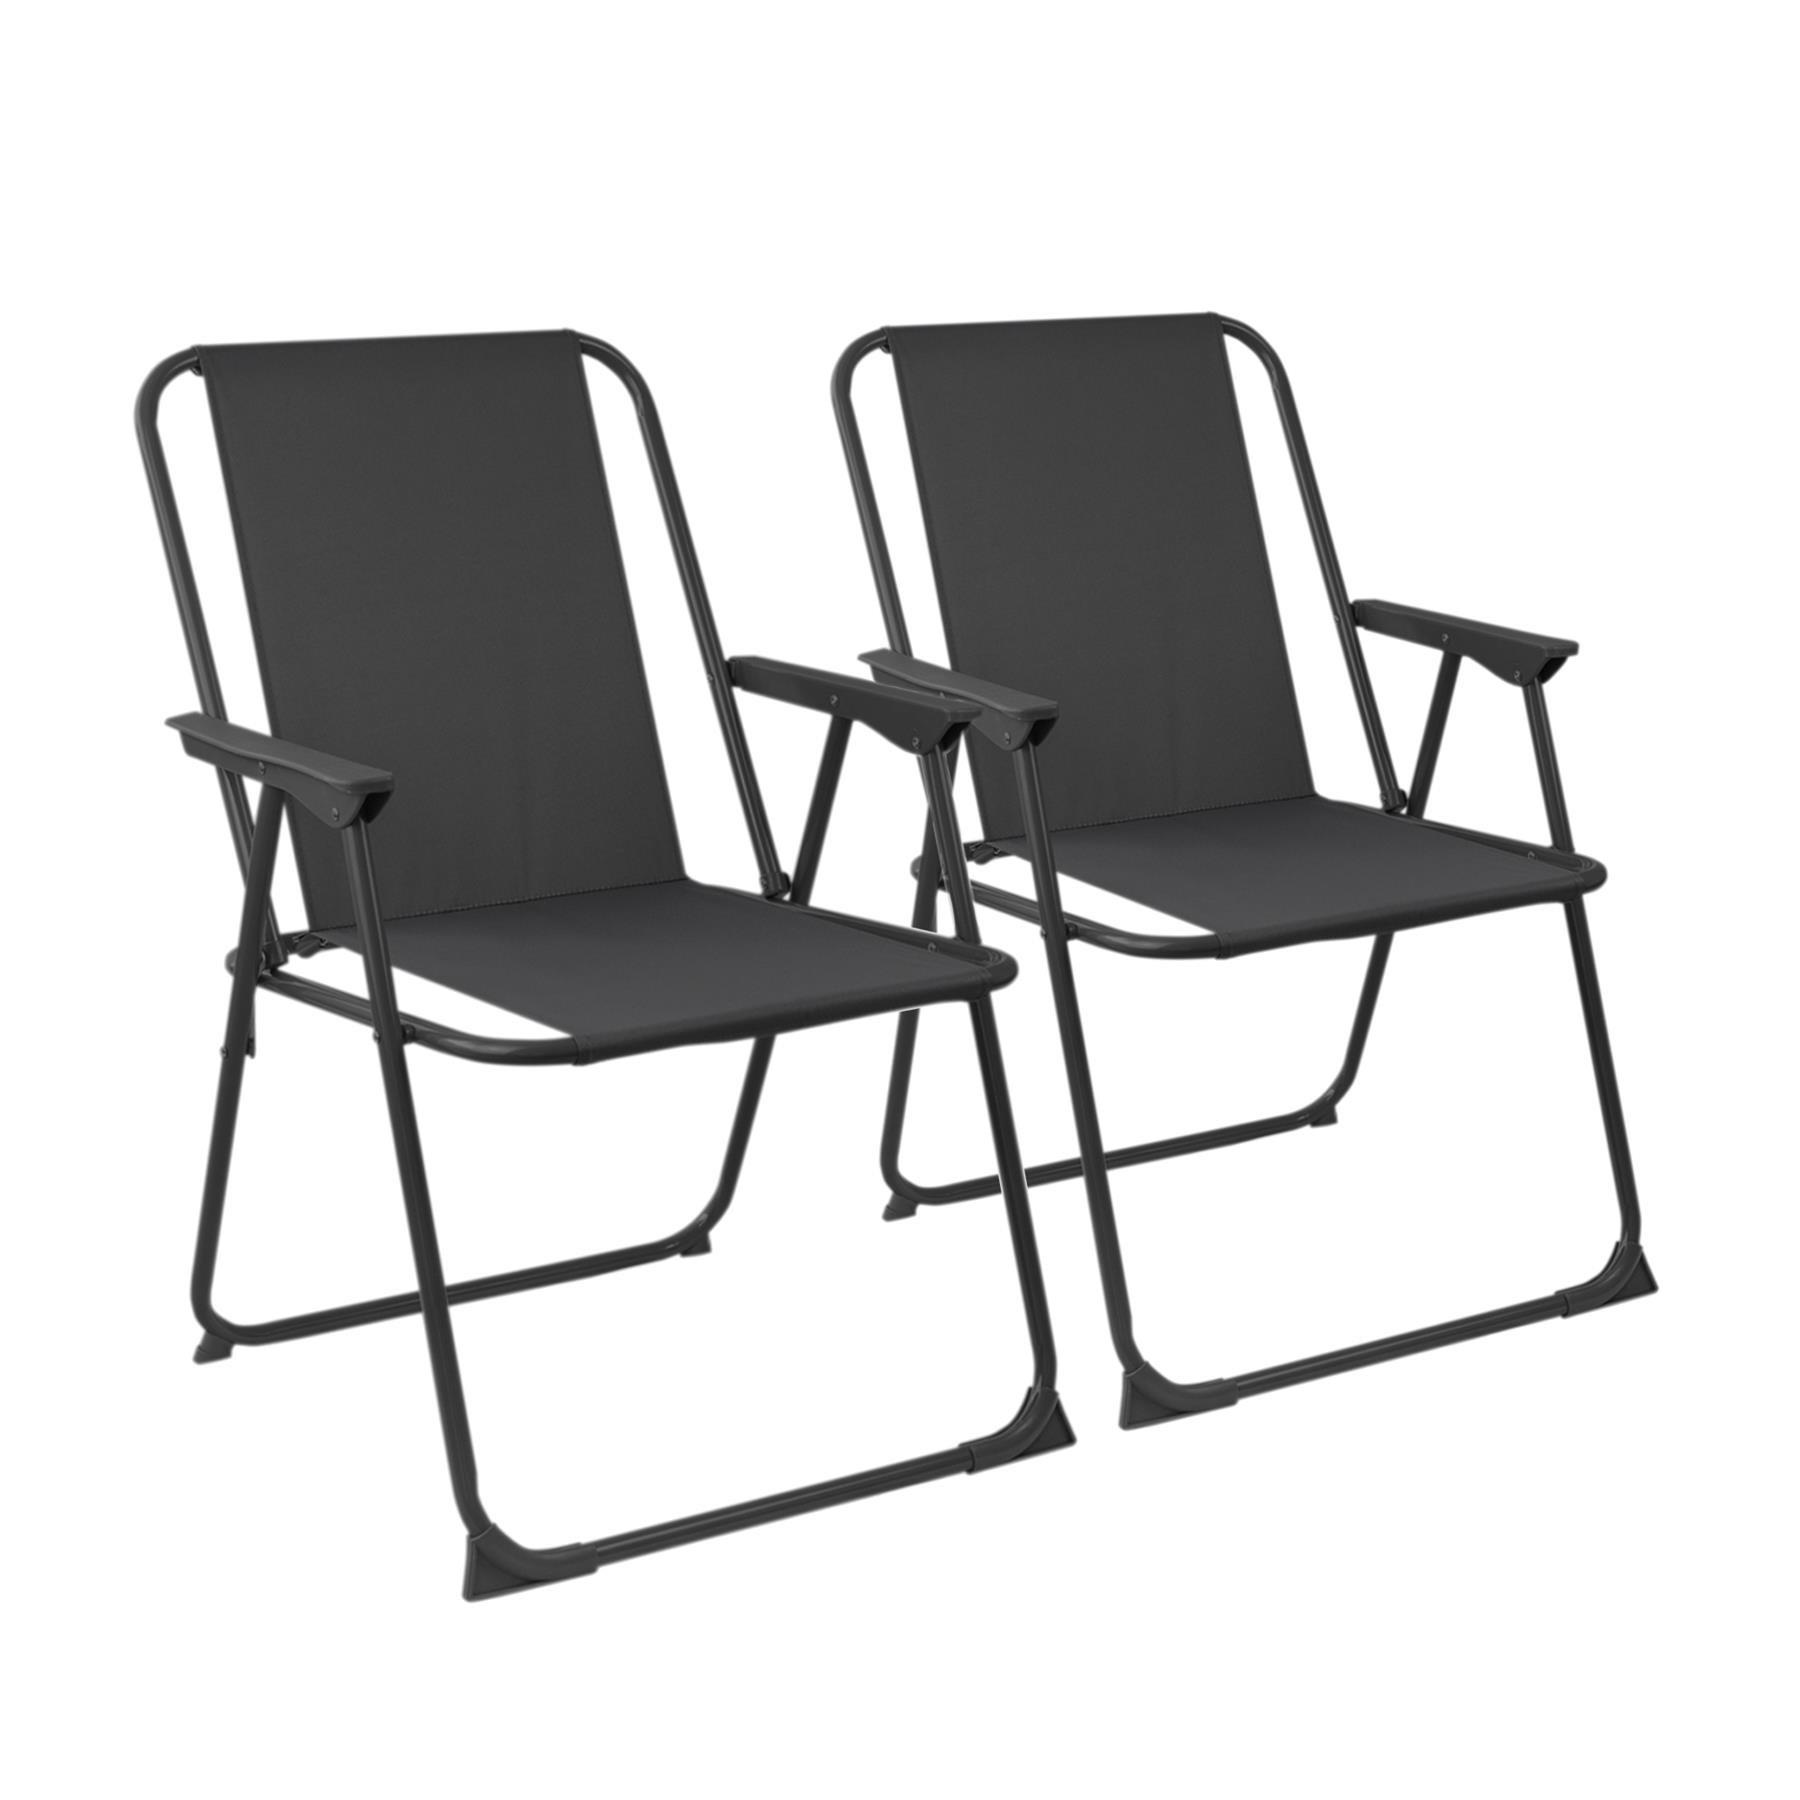 Folding Metal Beach Chairs | Black | Pack of 2 | By Harbour Housewares